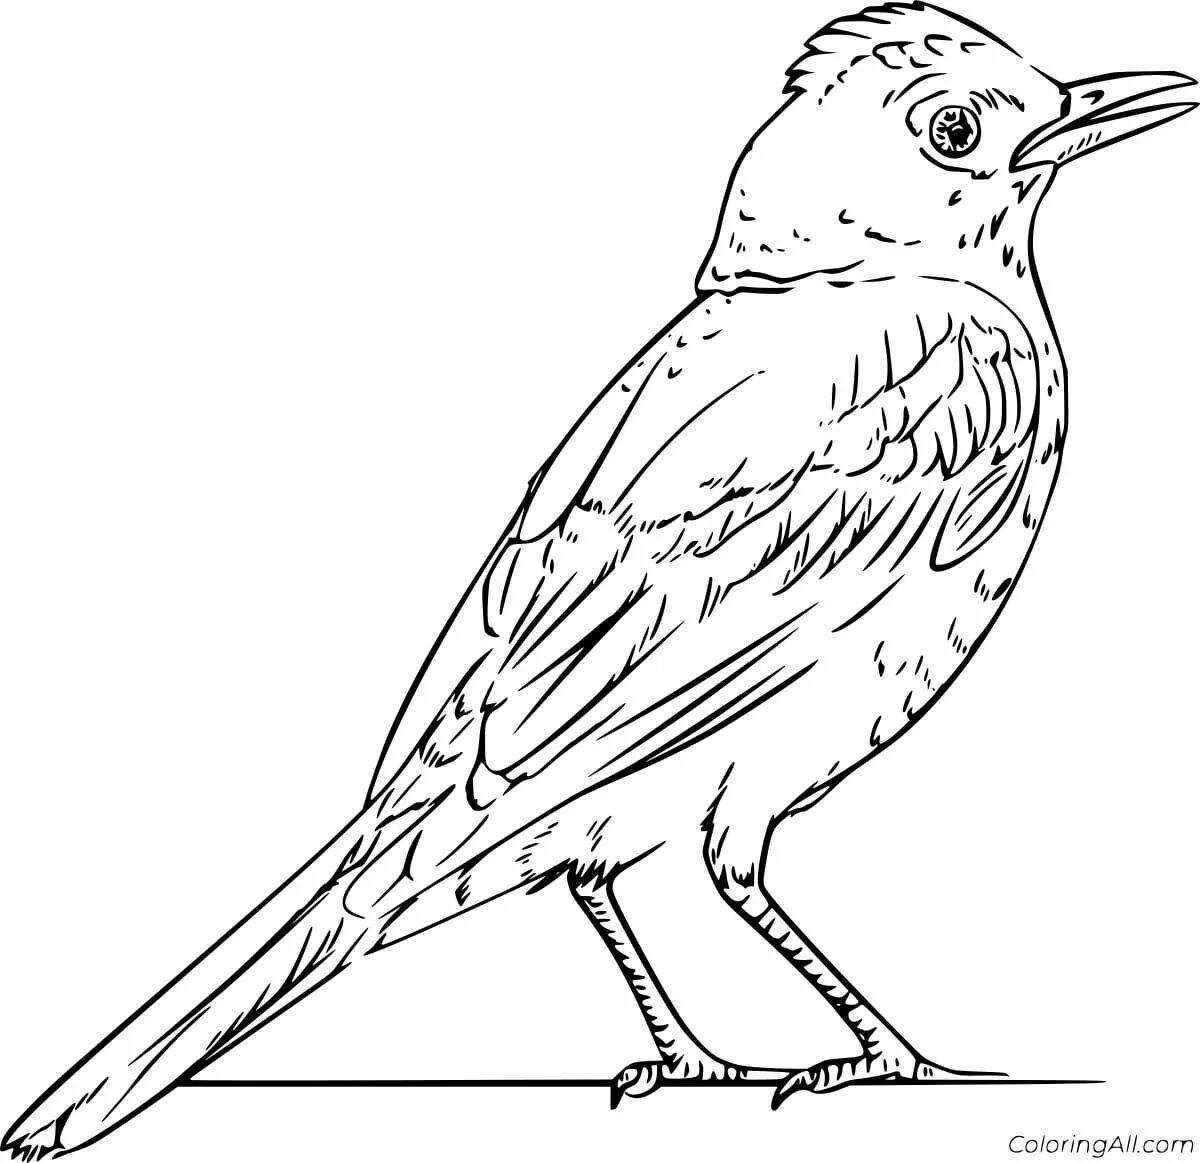 A striking starling coloring book for kids